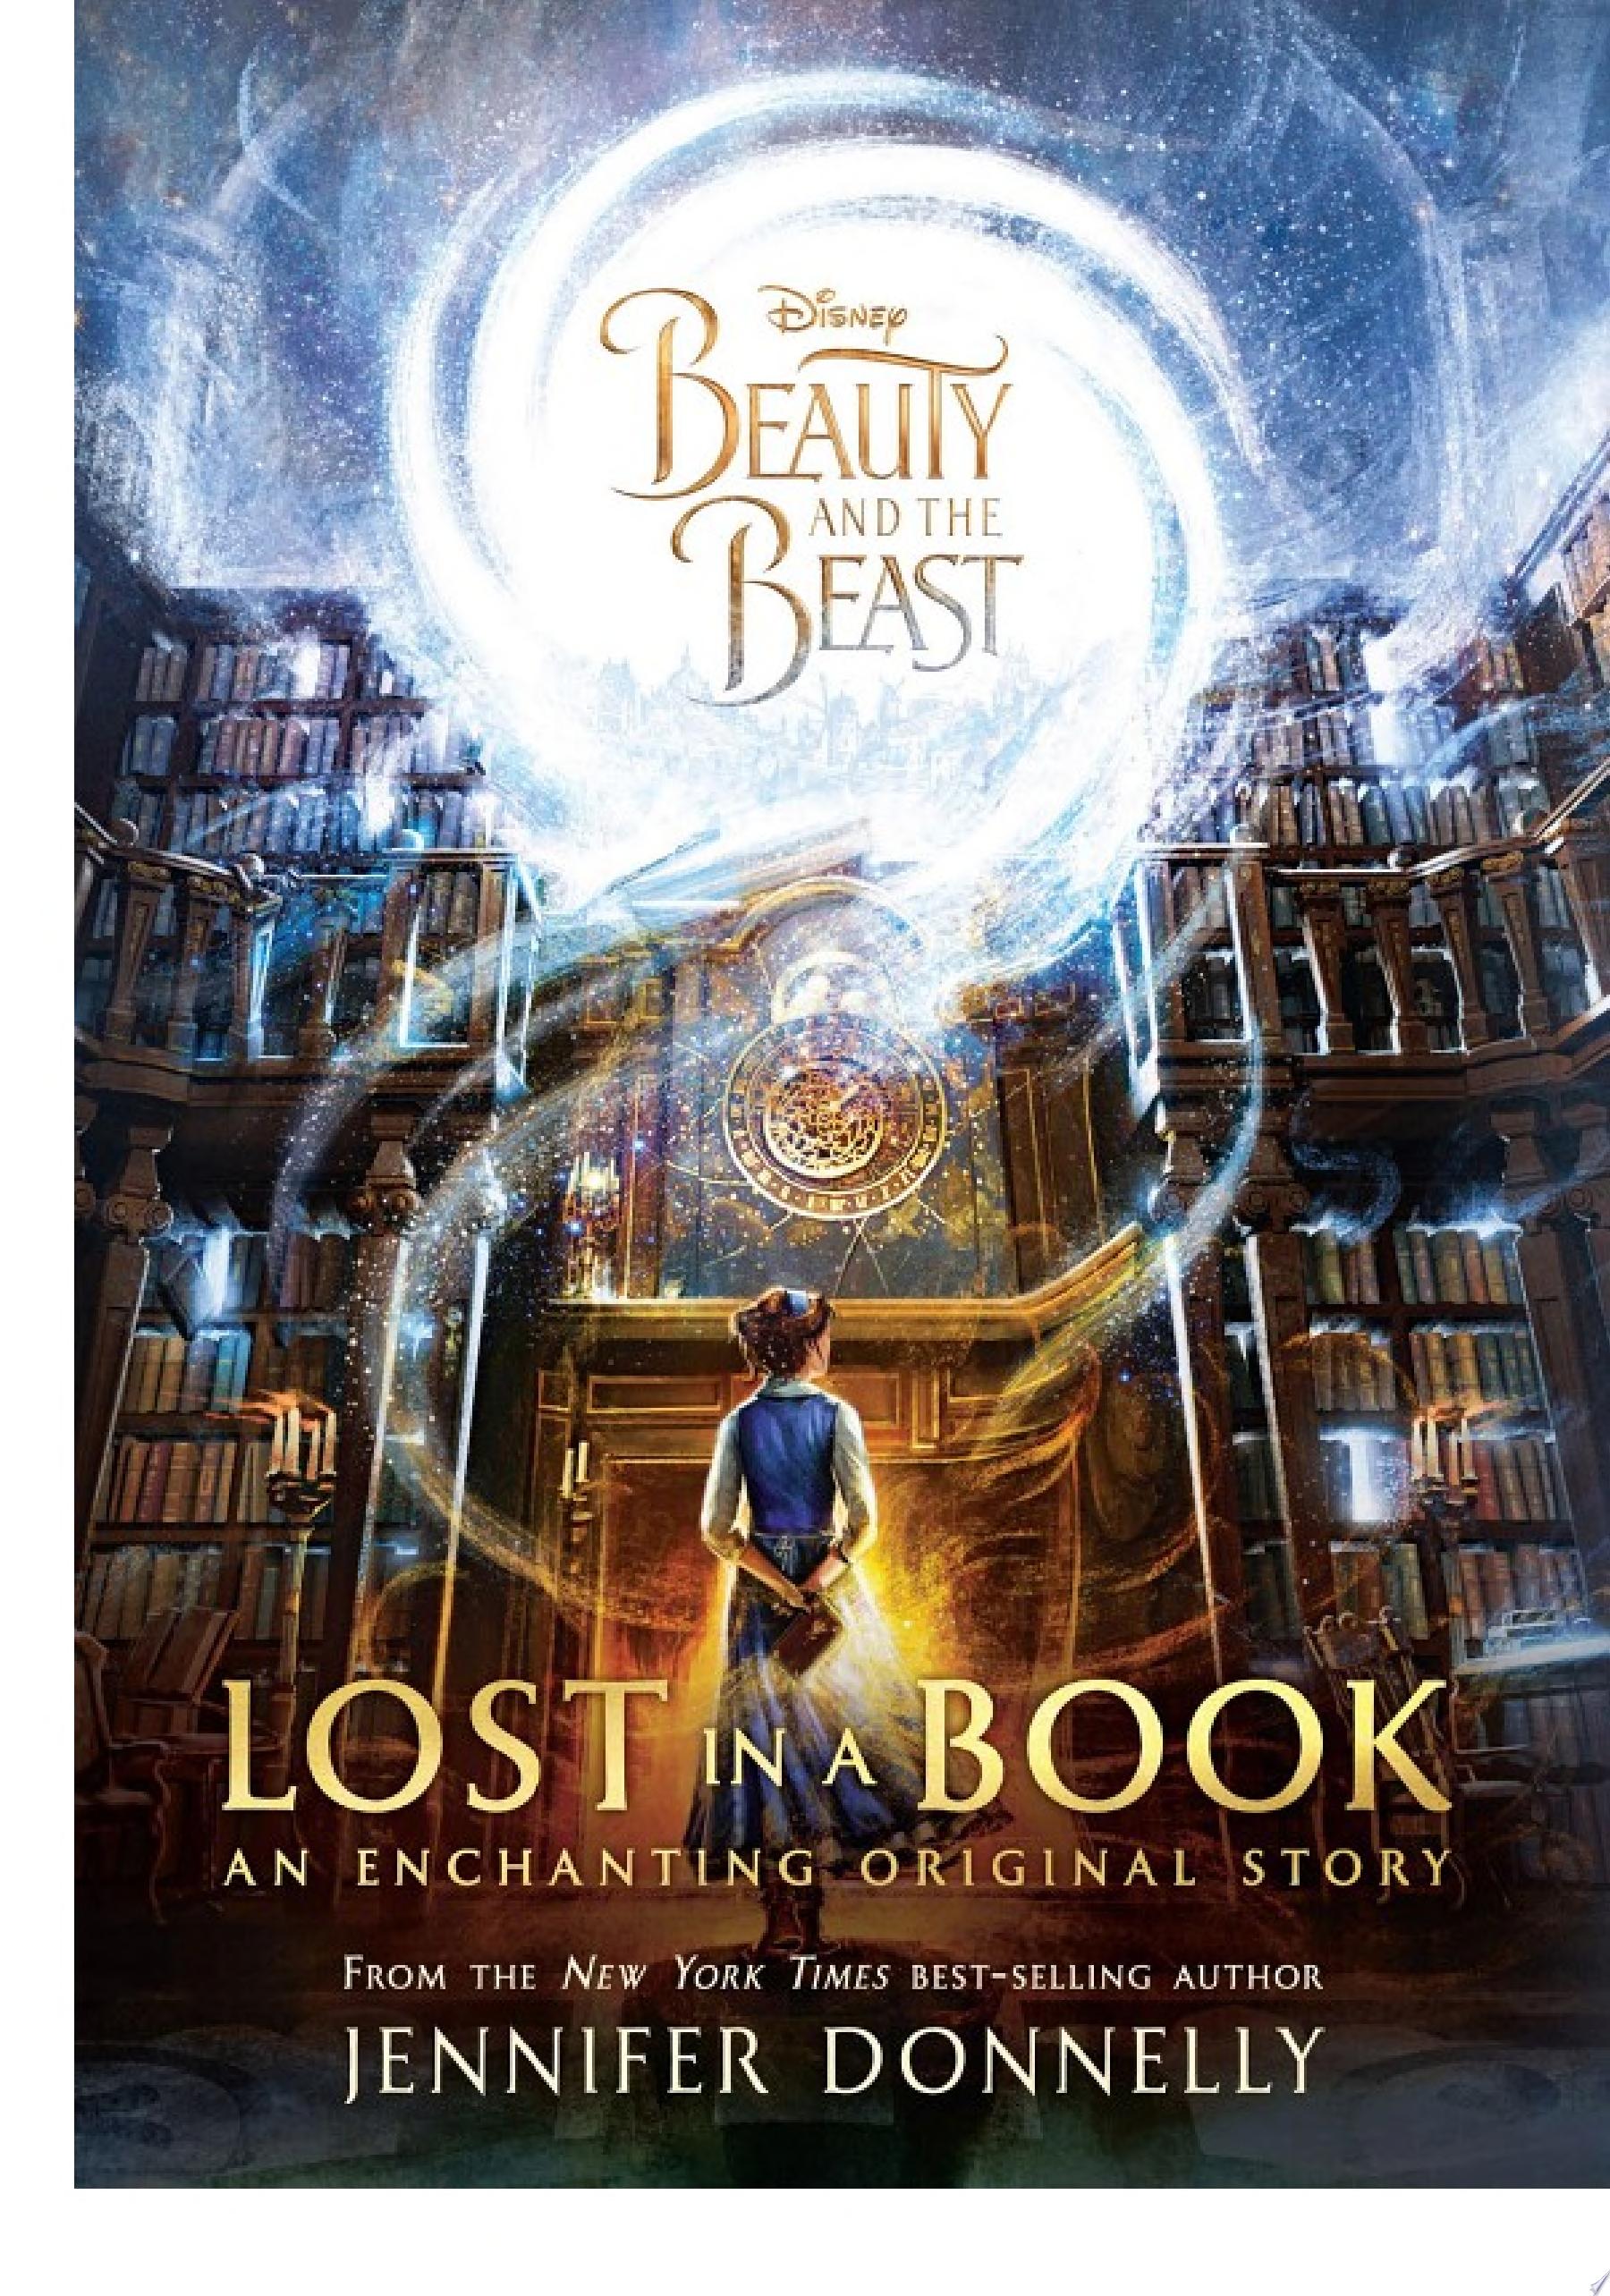 Image for "Beauty and the Beast: Lost in a Book"